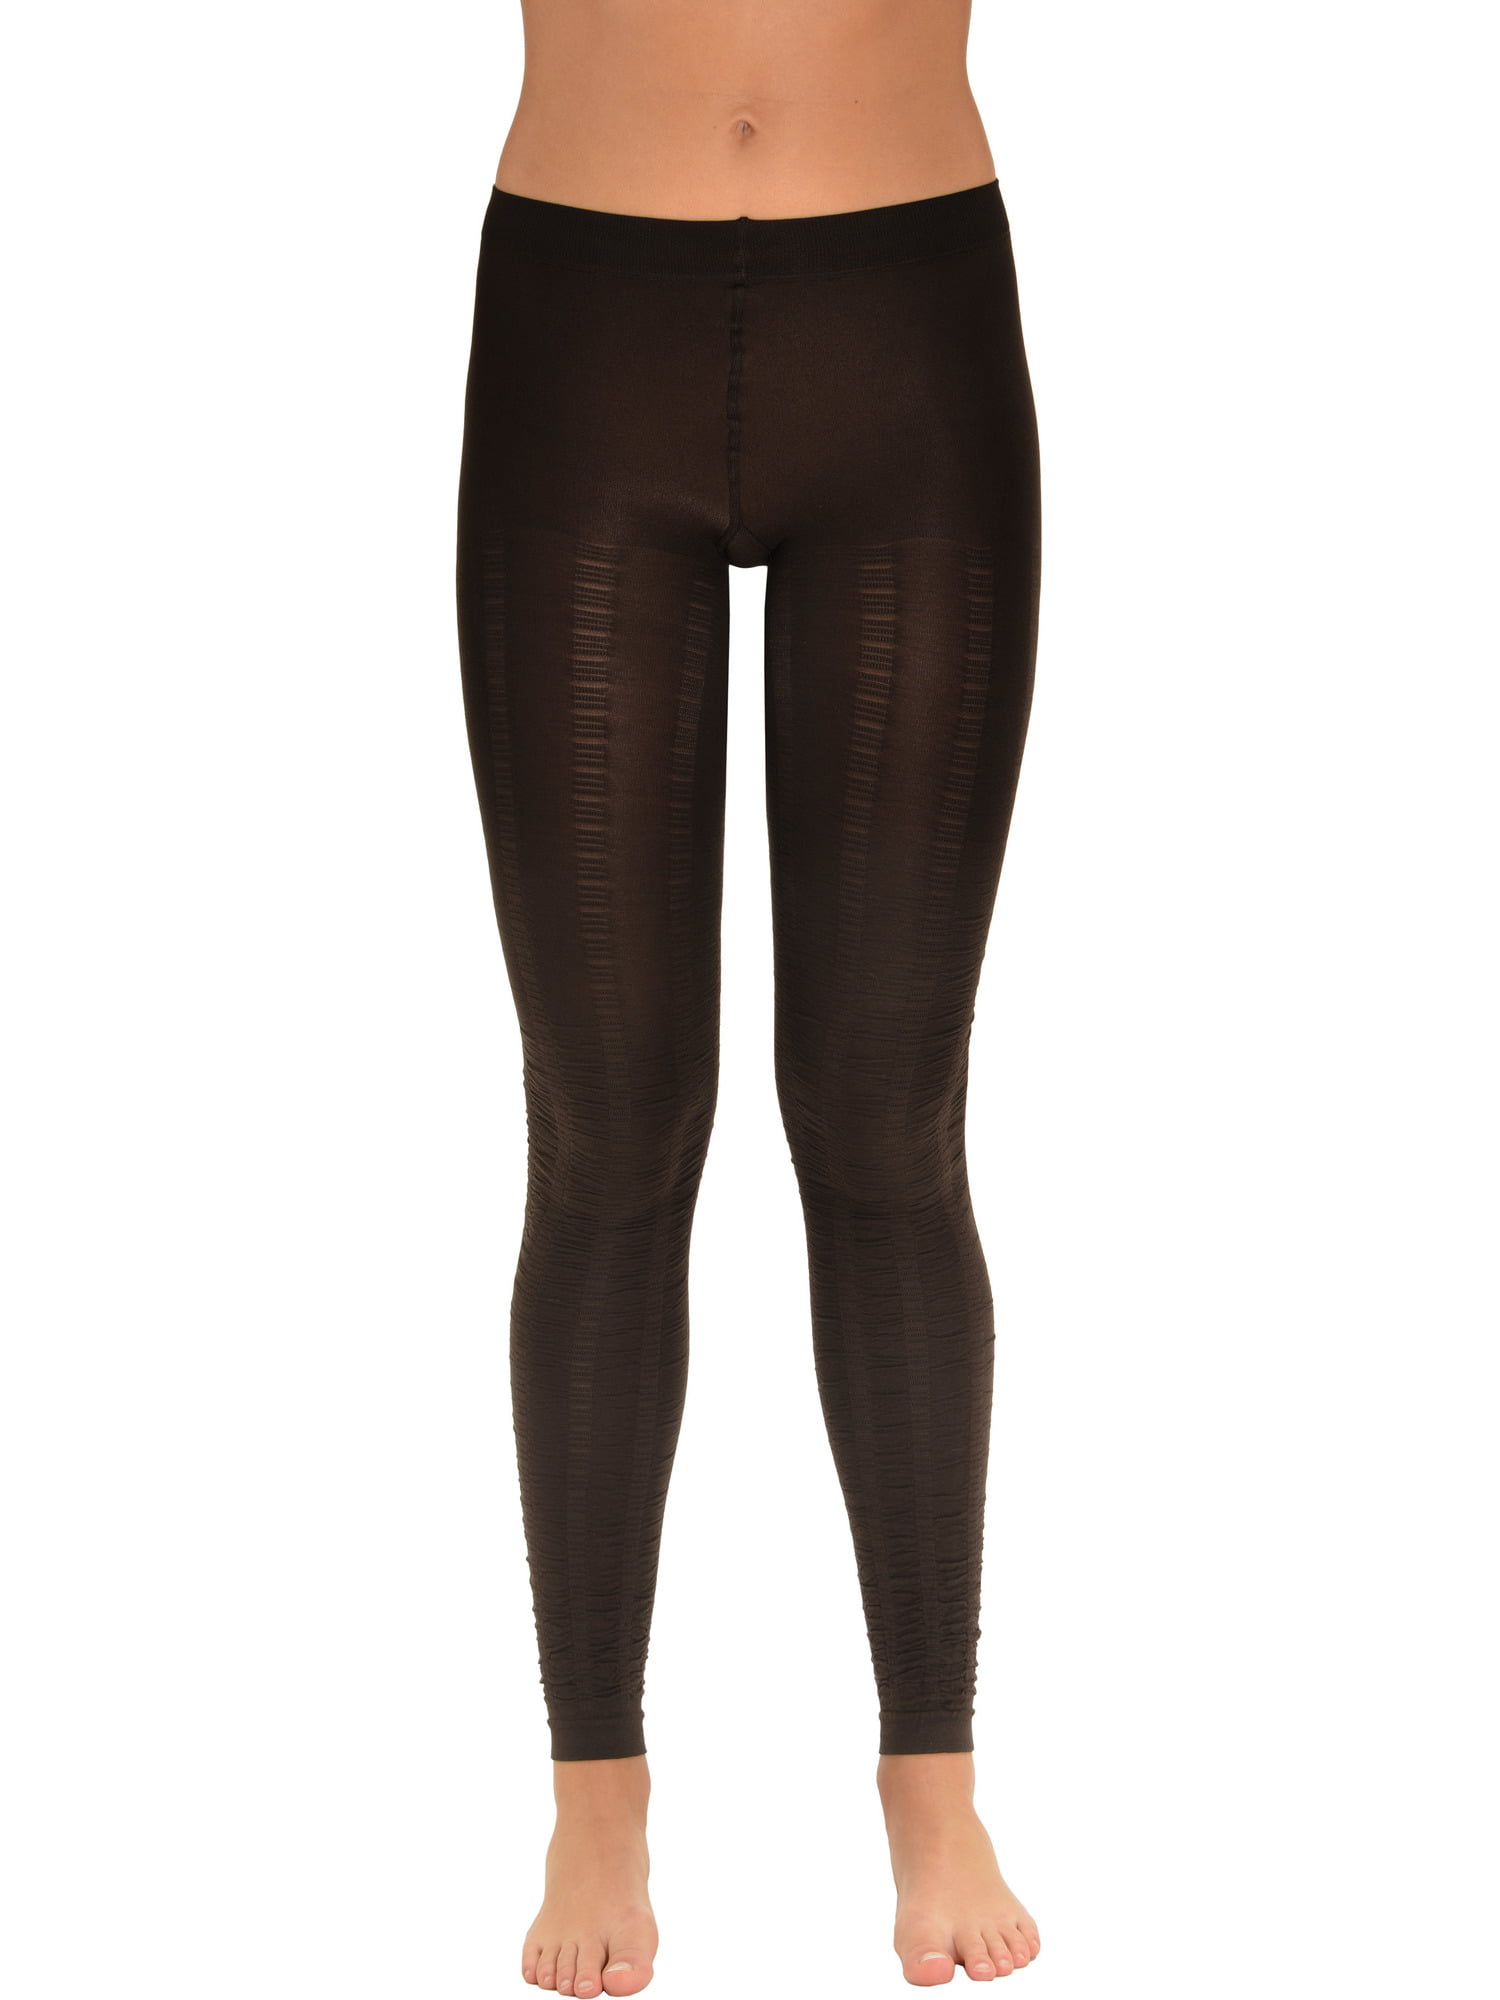 Womens Low Rise Leggings - Fashion Tights in Wet Look Black Tricot